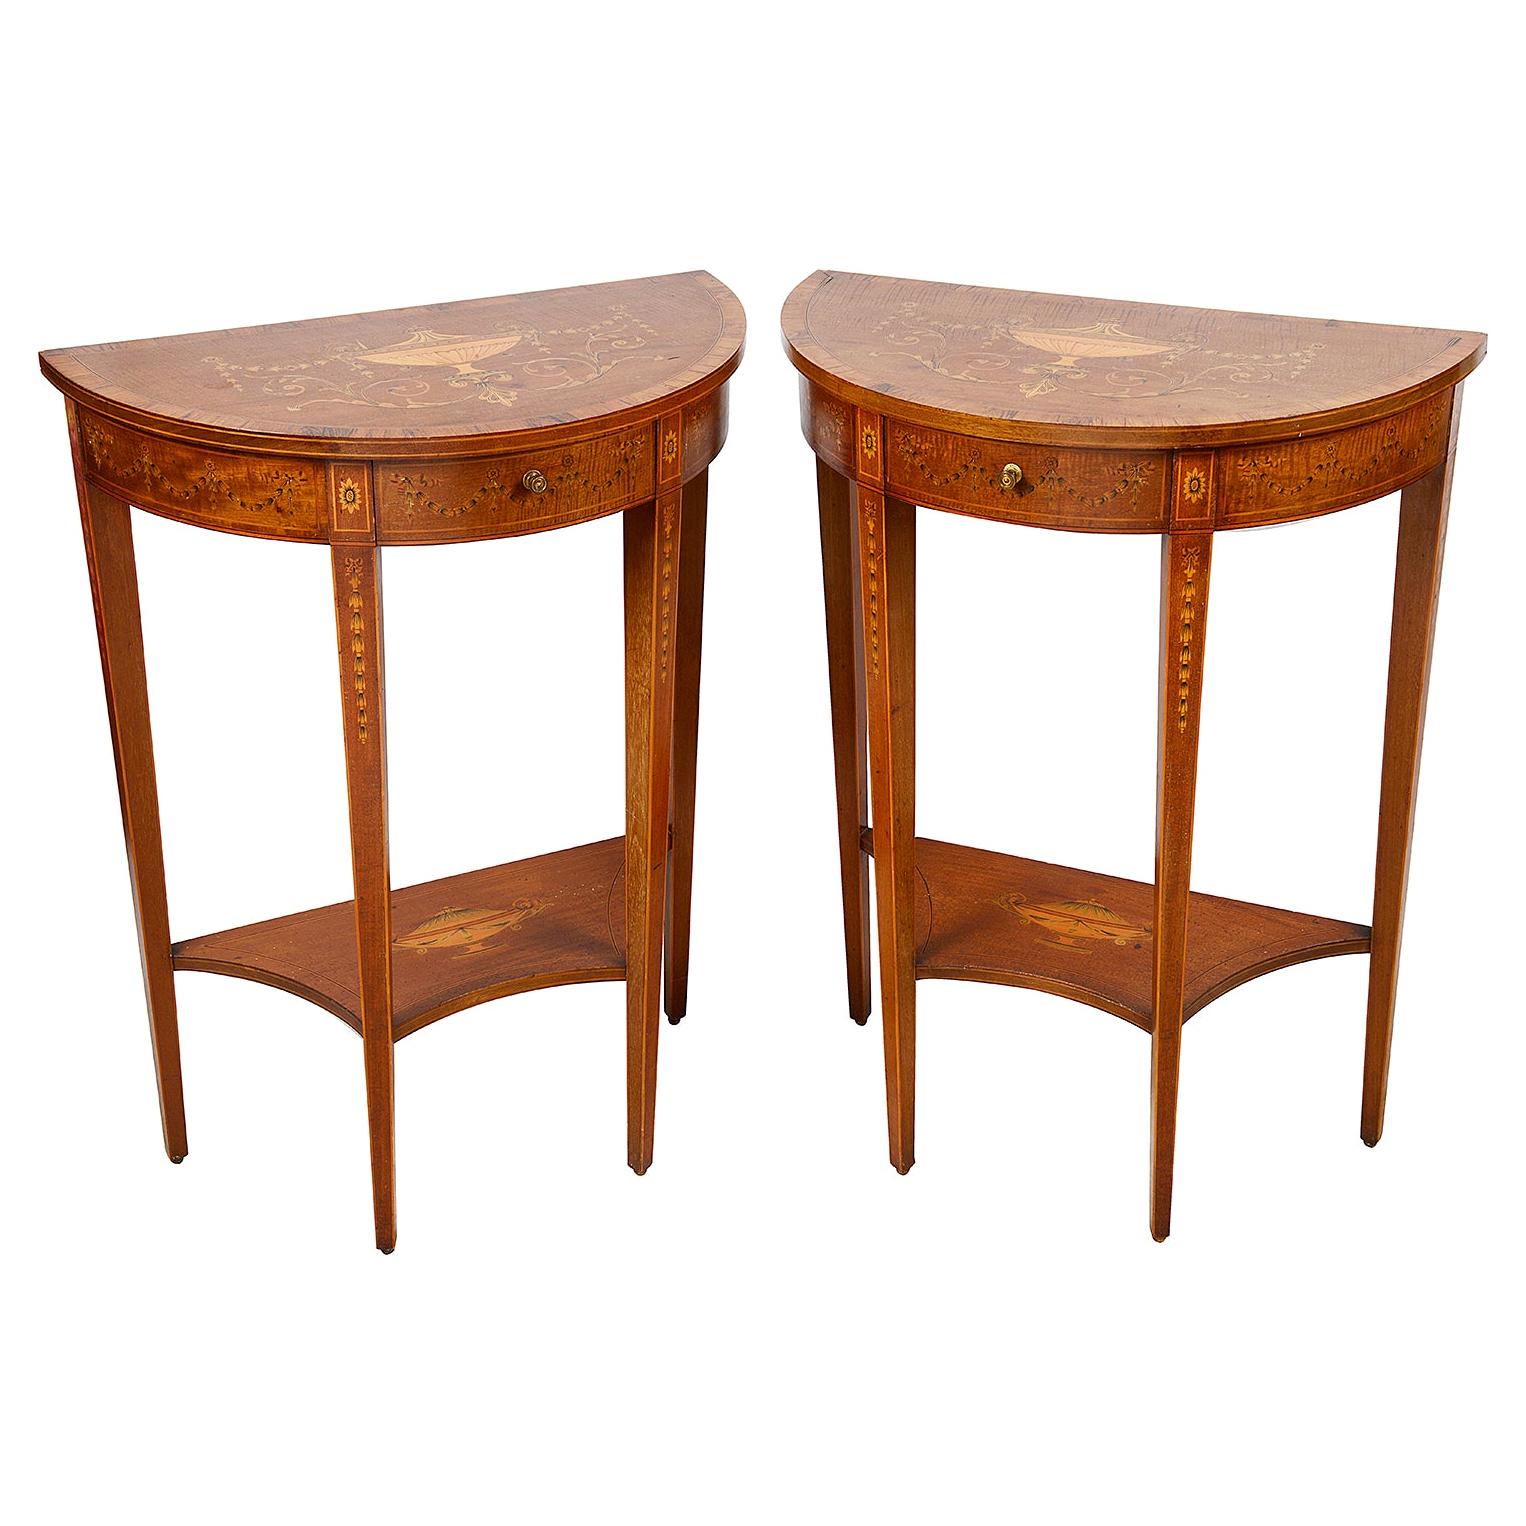 Pair of Sheriton Style Inlaid Side Console Tables, circa 1890